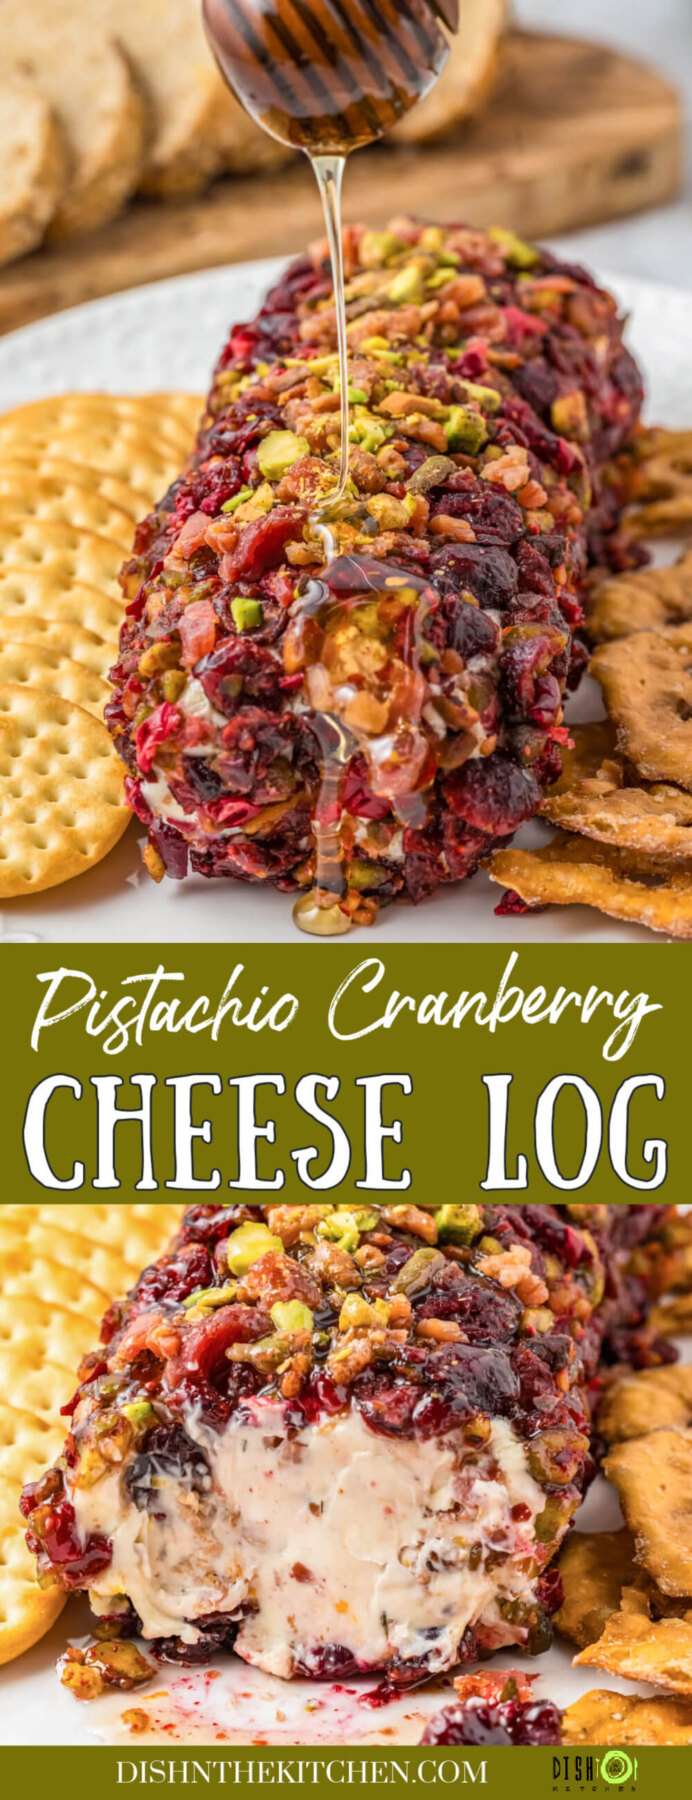 Pinterest image showing a whole pistachio and cranberry cheese log and another that has been sliced to show the inside.